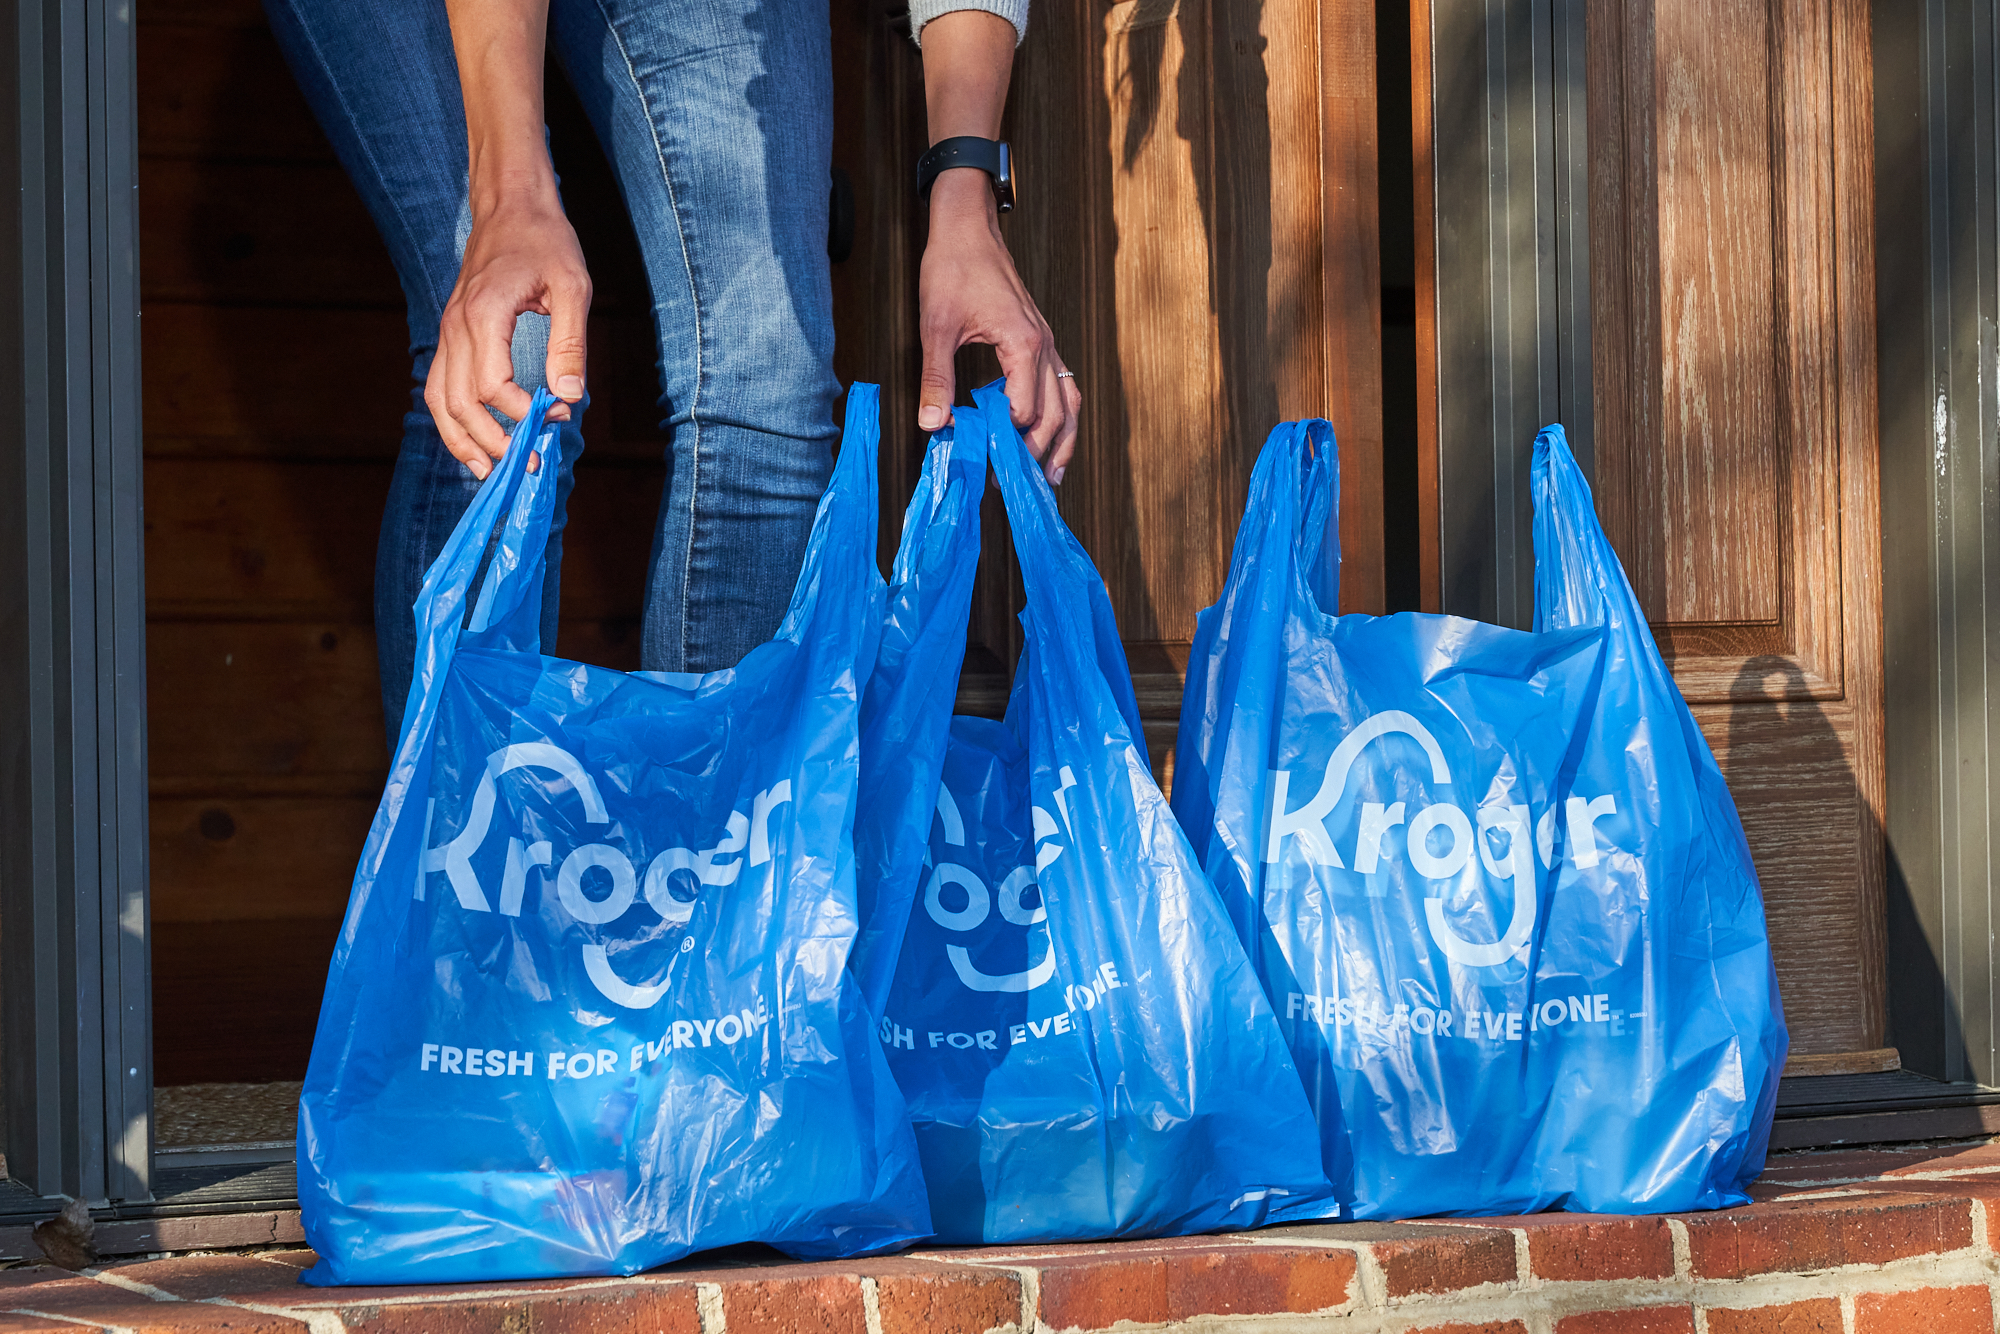 Kroger to Phase Out Single Use Plastic Bags